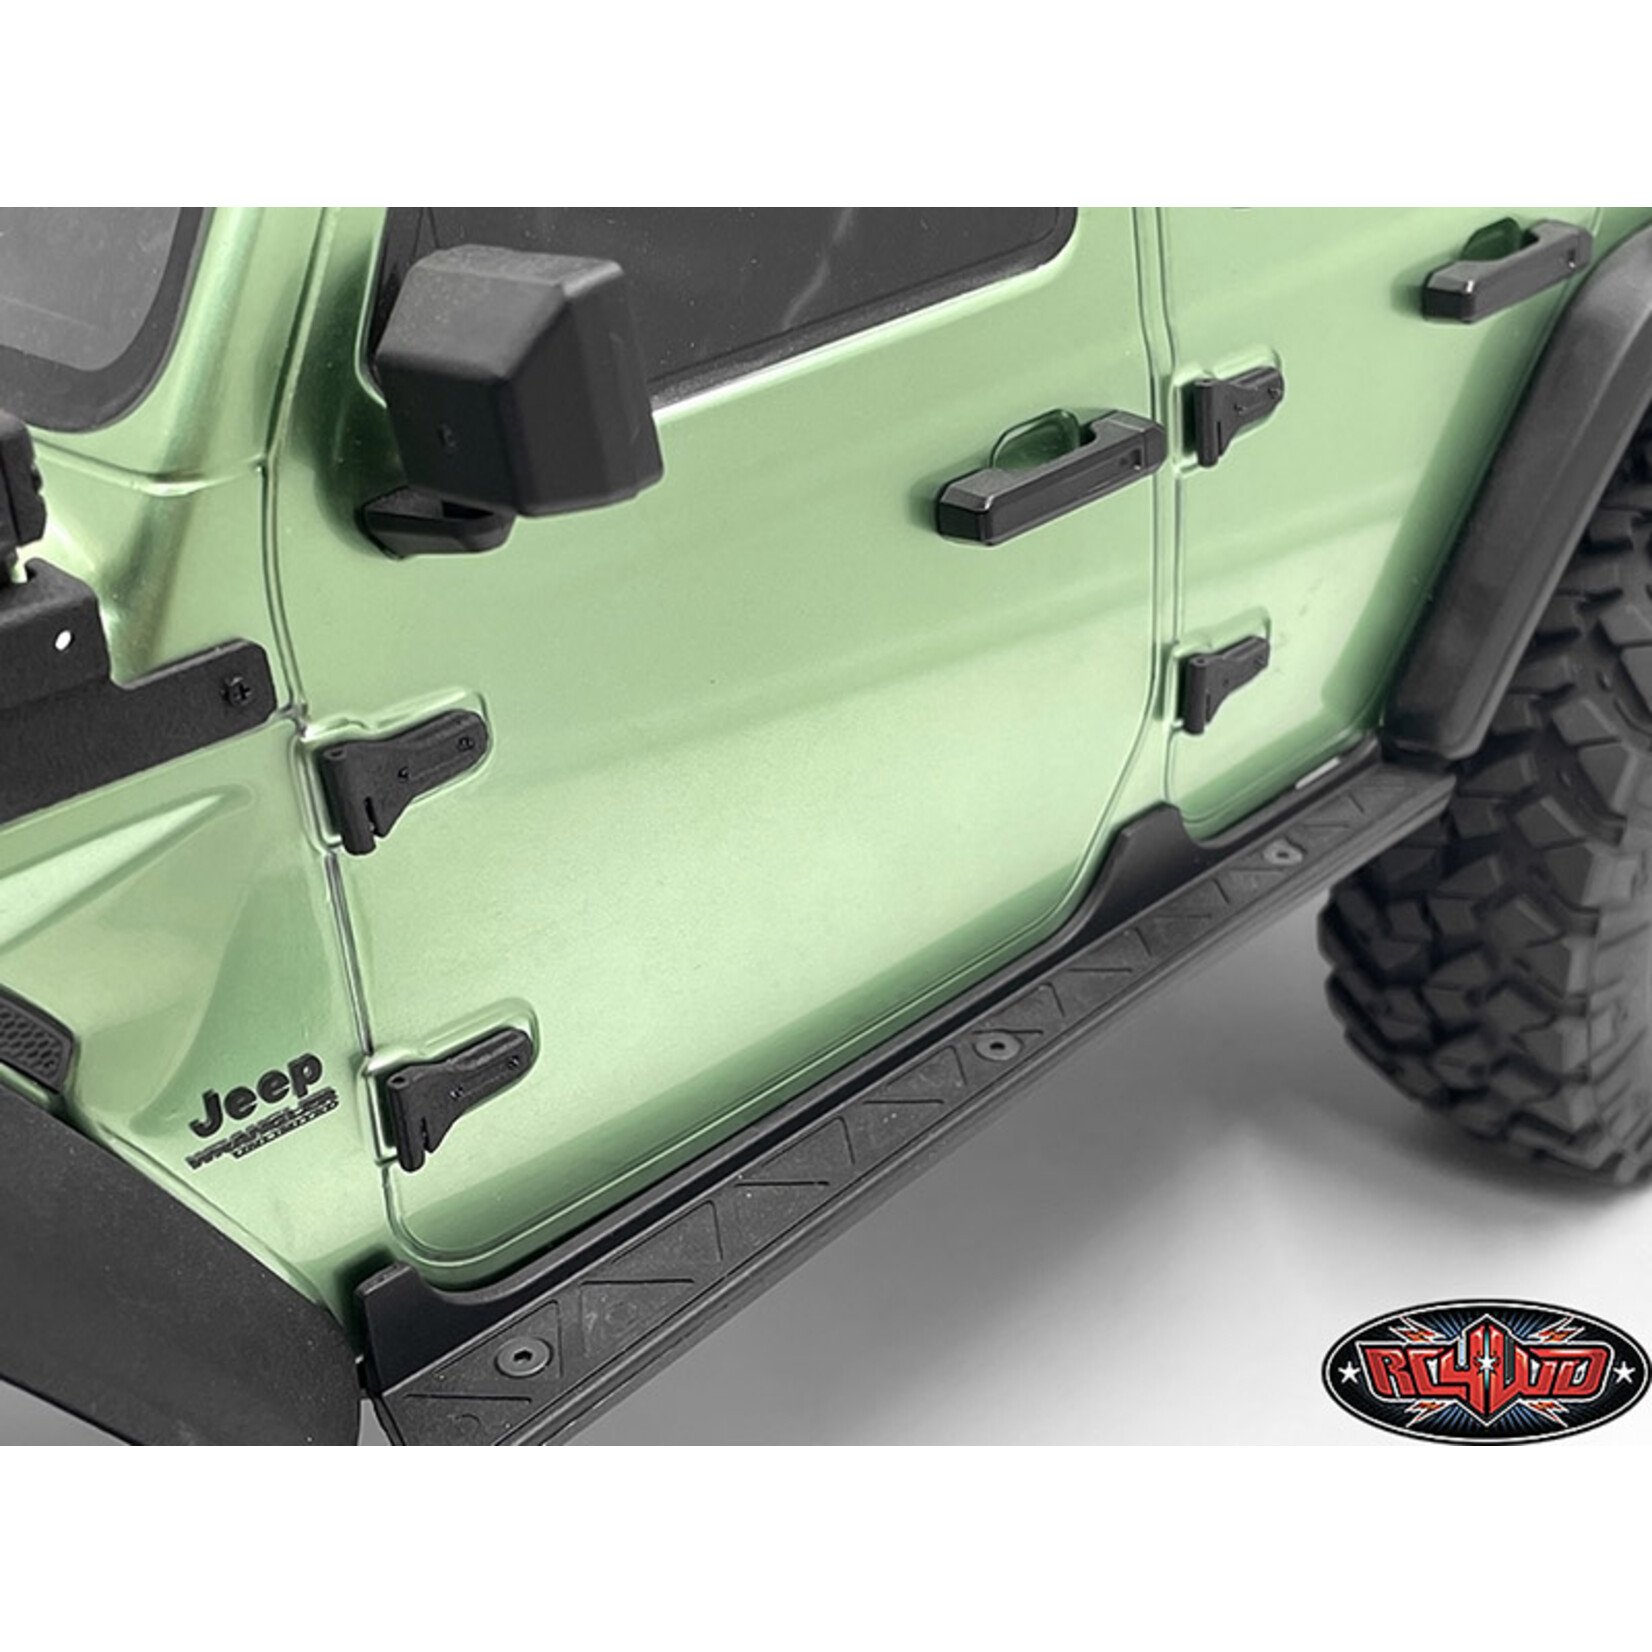 CCHAND RC4WD CChand Axial SCX10 Jeep Wrangler Complete Door and Tailgate Hinge Set #VVV-C1224